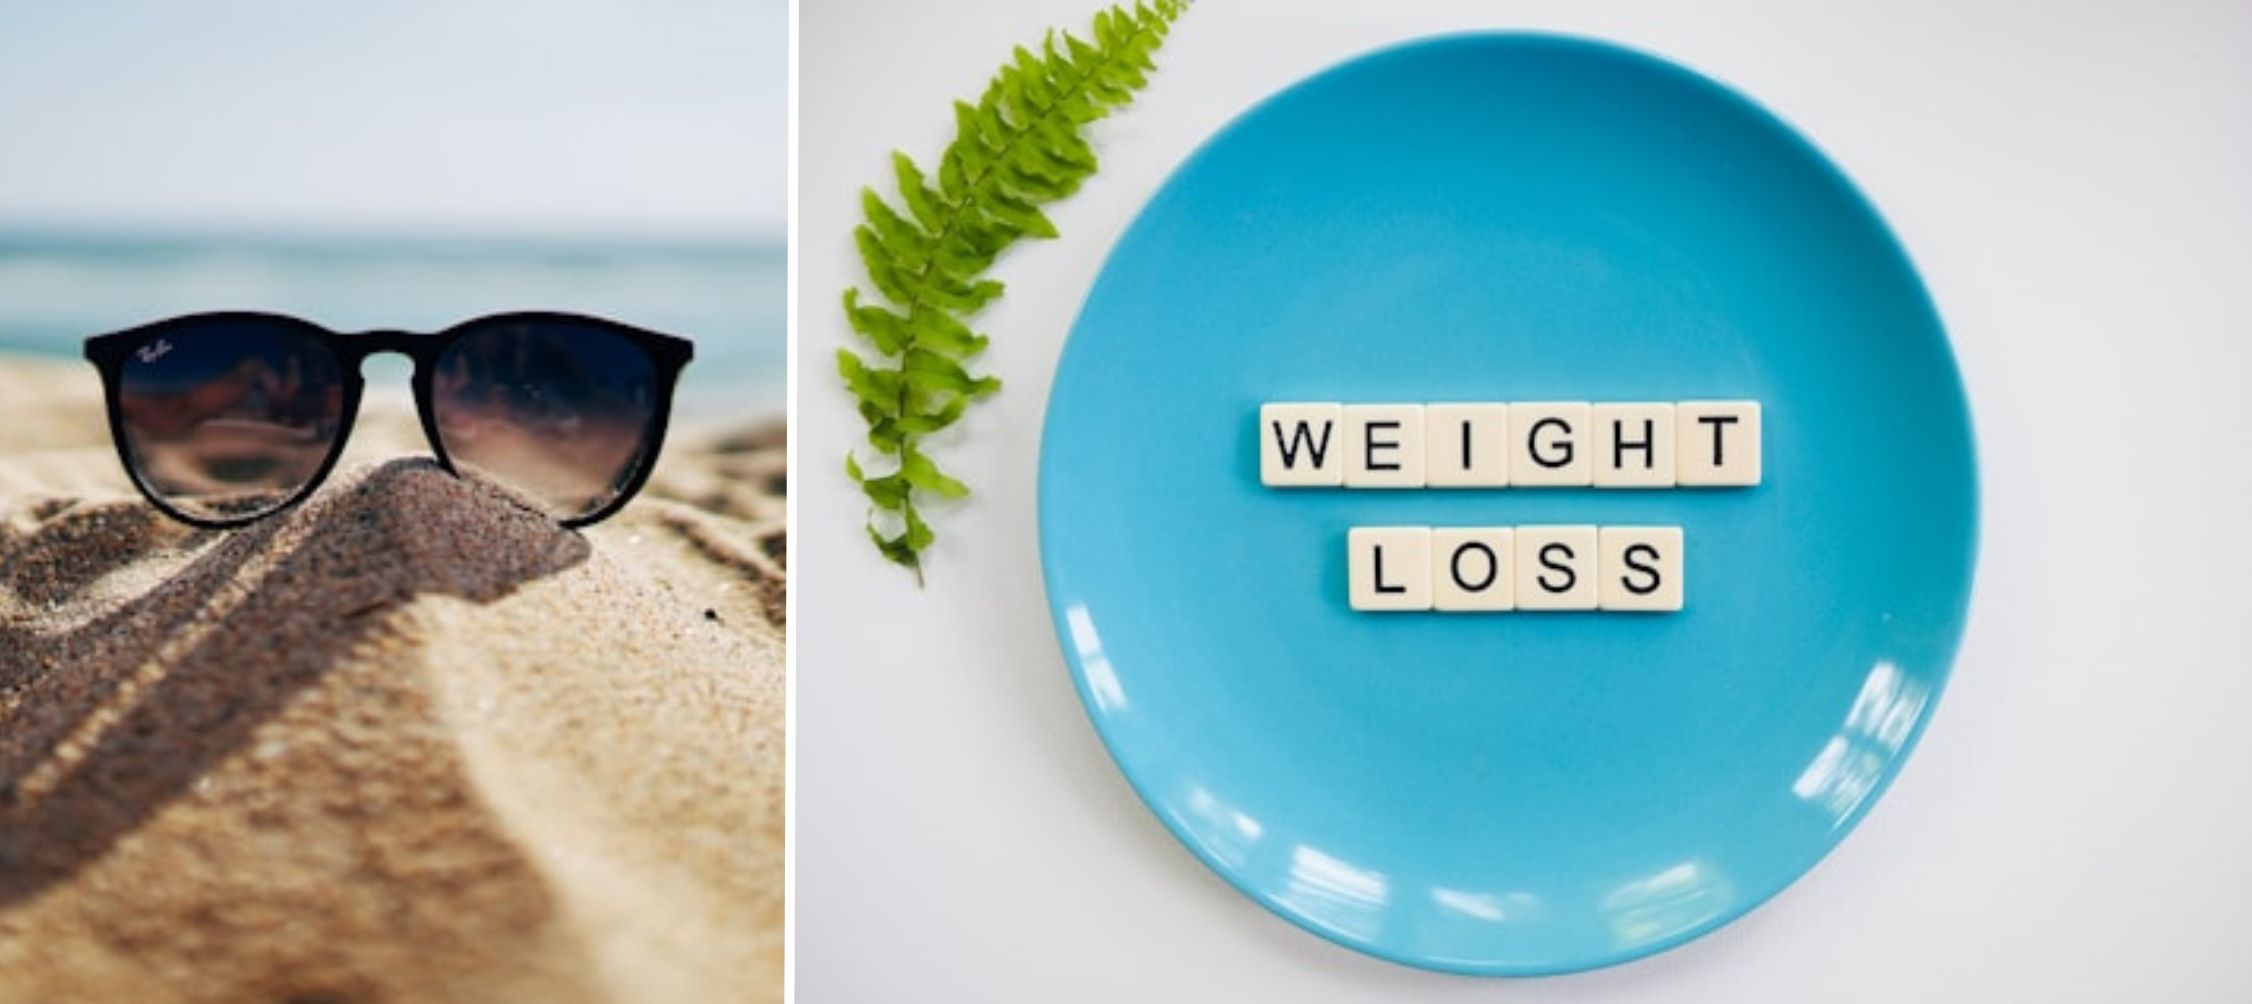 5 Simple Habits That Can Help You Lose Weight for Summer